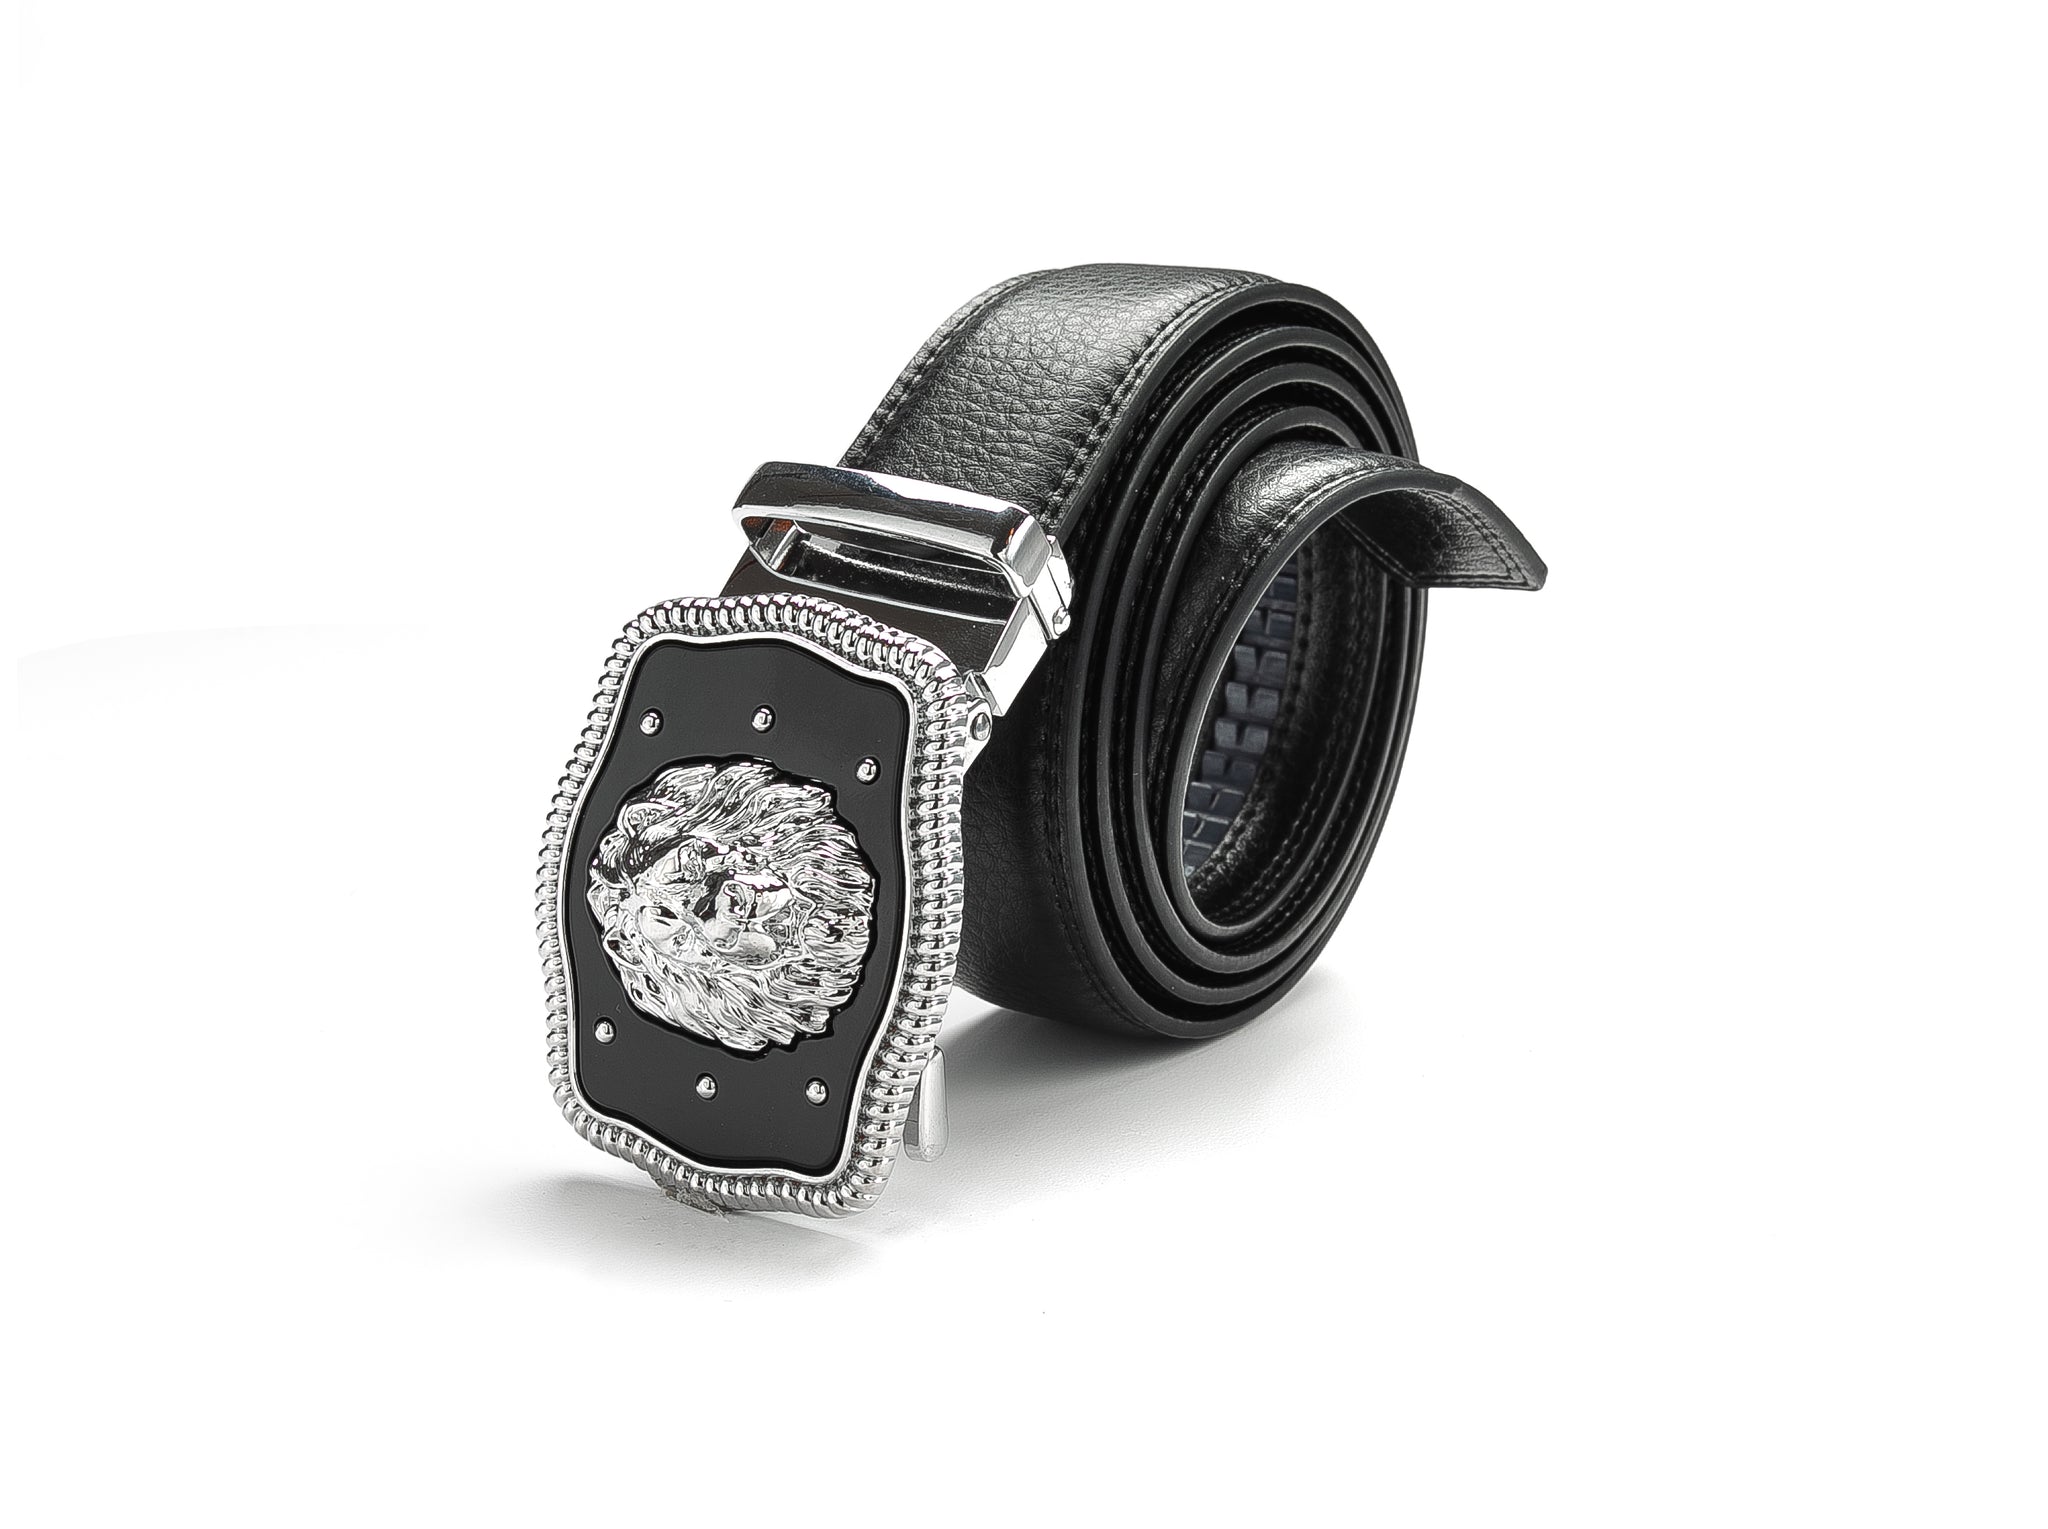 Formal Mens Belts Automatic Buckles Genuine Leather Ratchet Straps